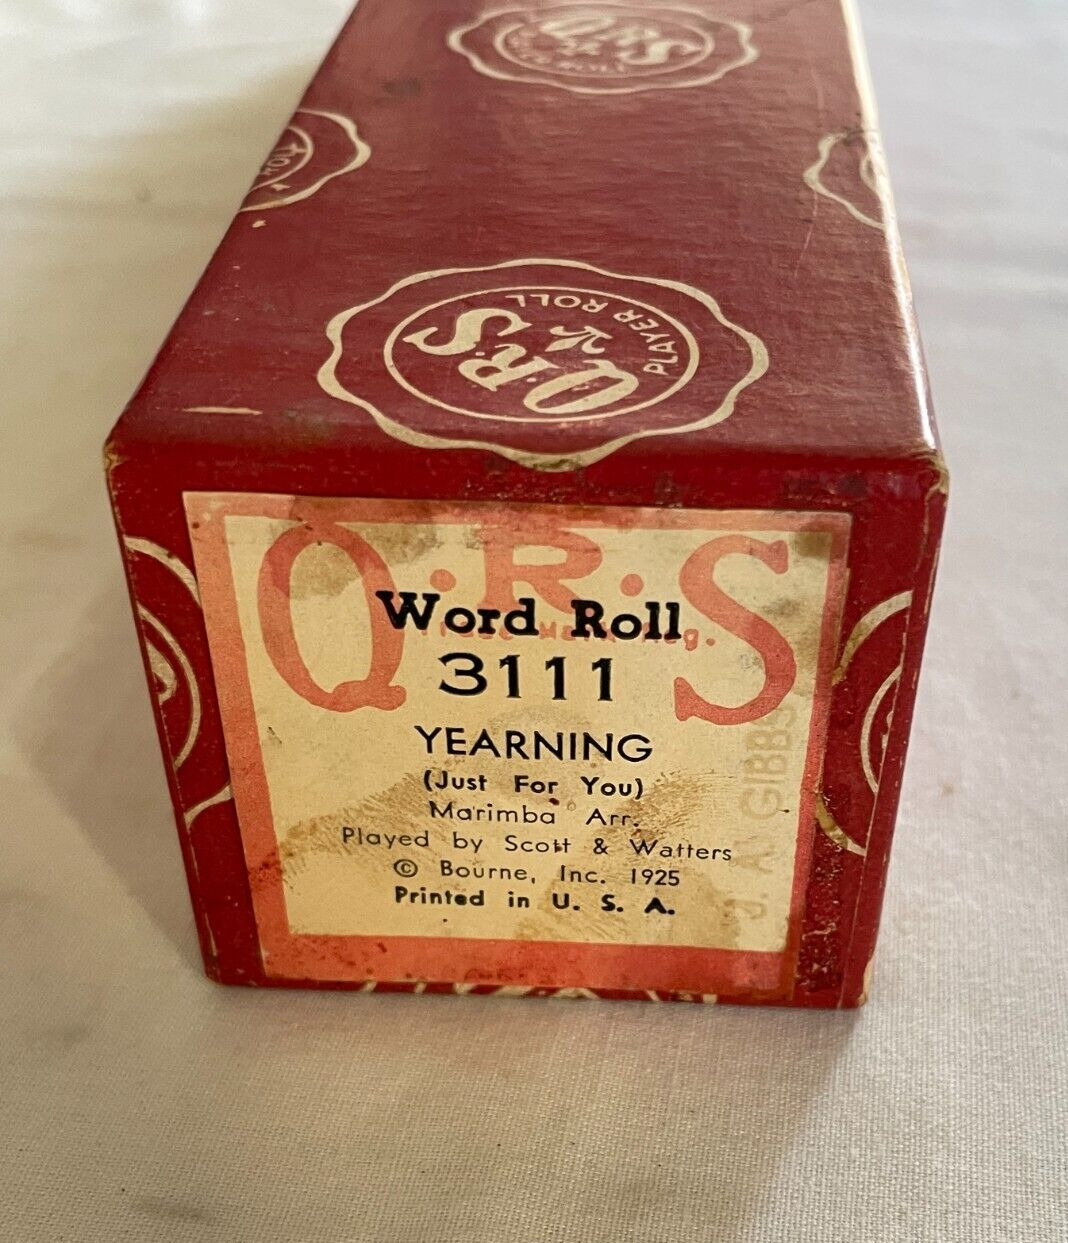 Qrs Player Piano Roll #3111 - Yearning